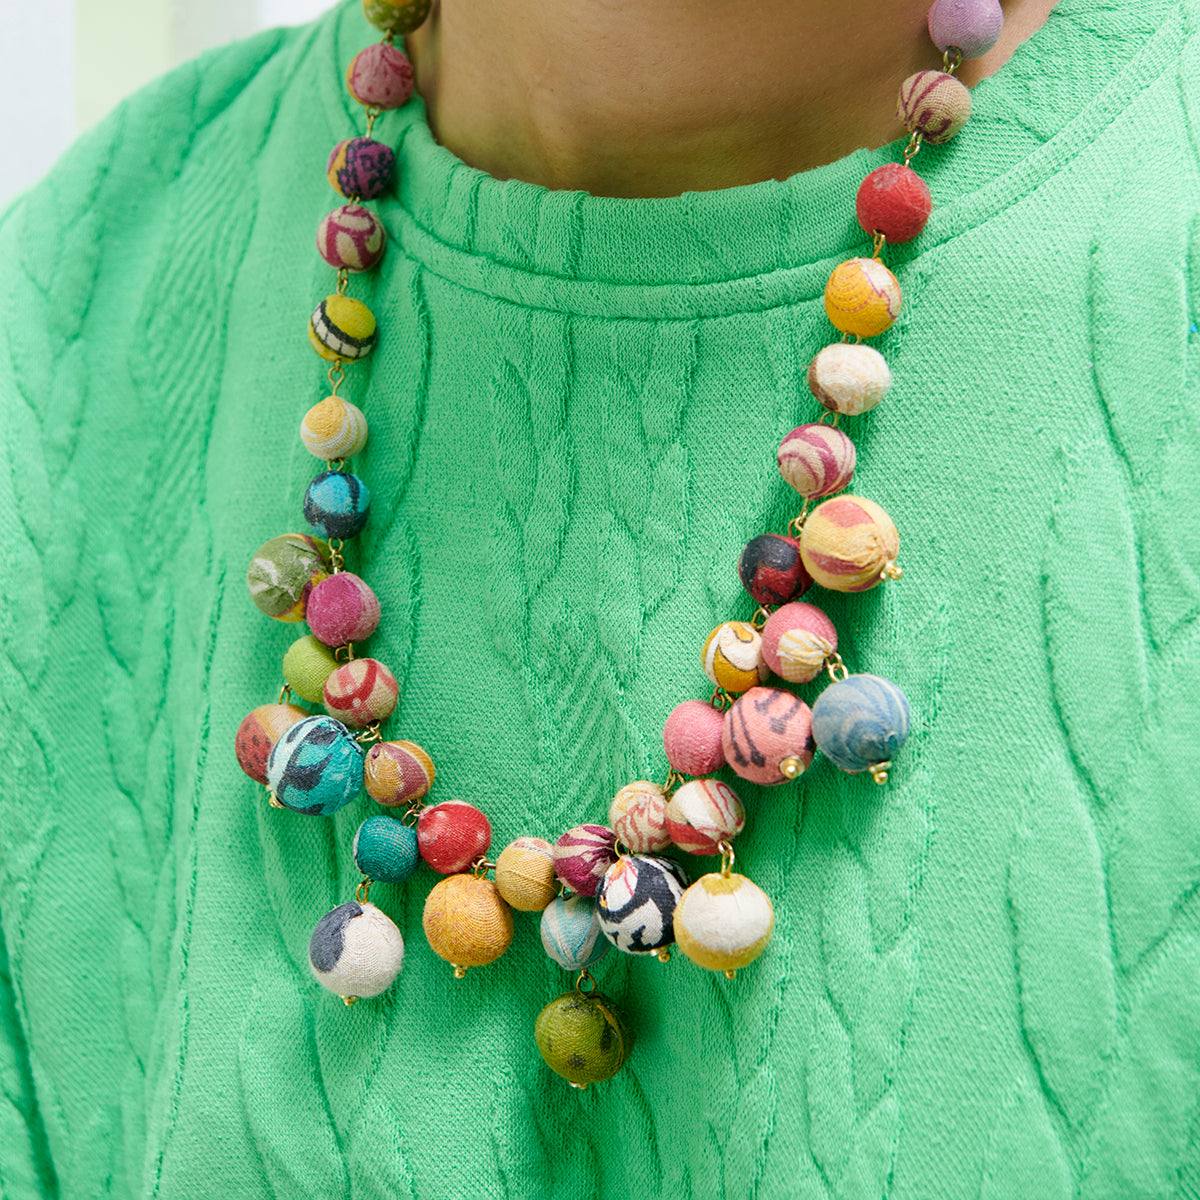 A close up of the Kantha Bloom Necklace